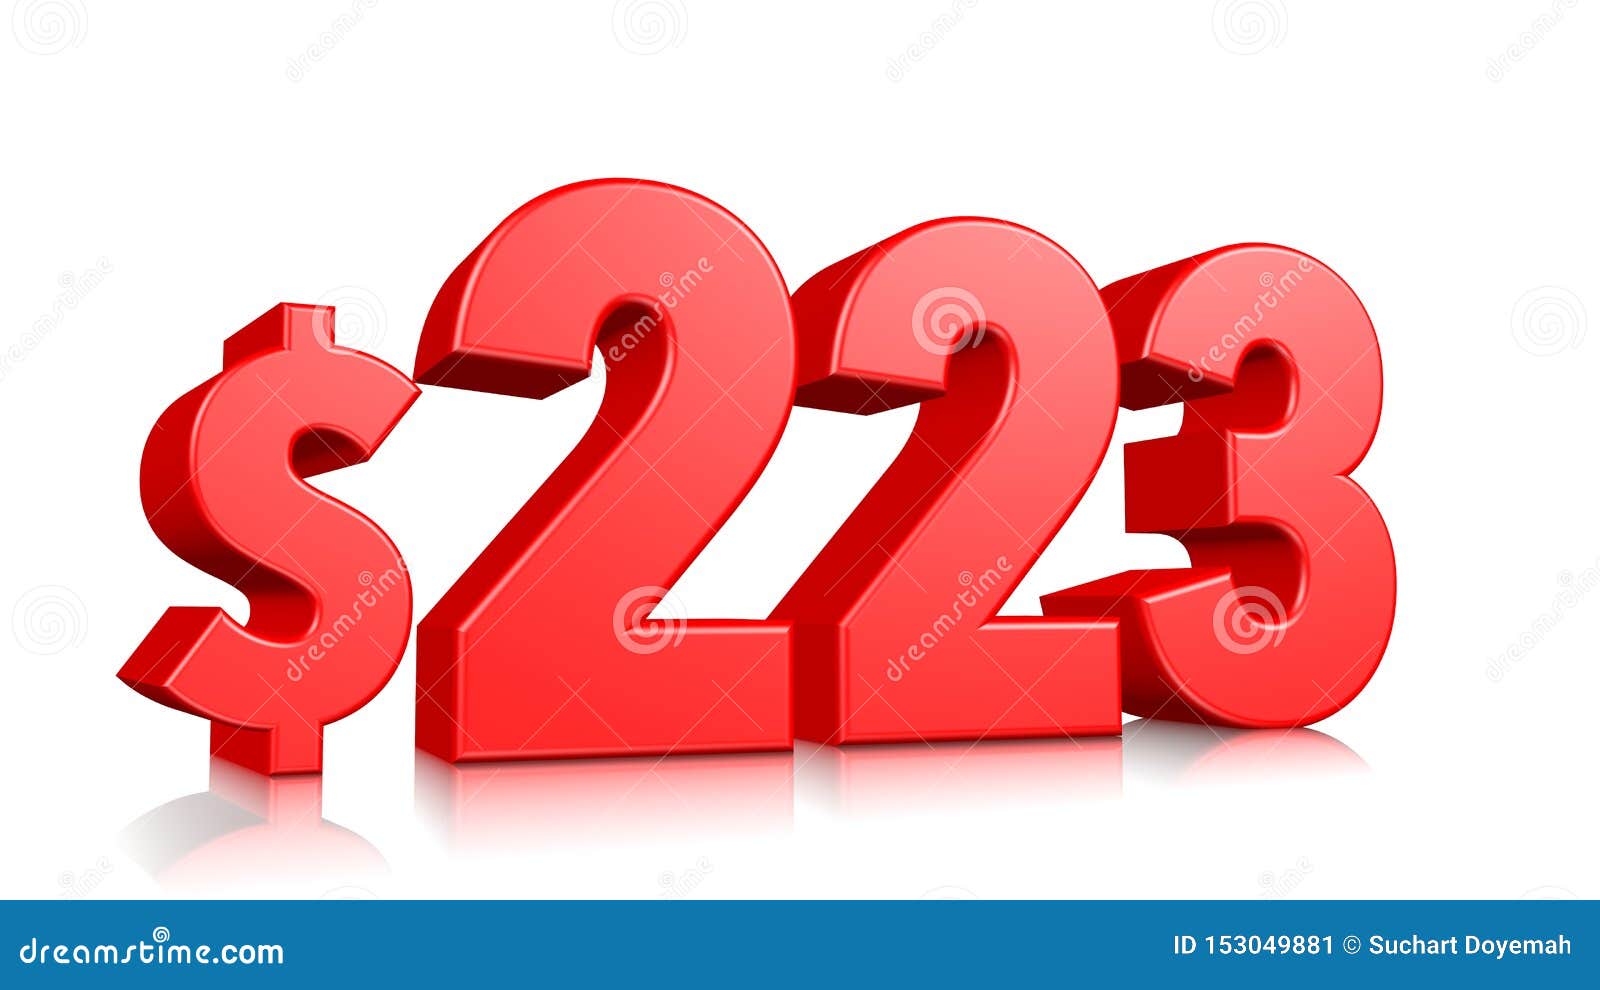 223-two-hundred-and-twenty-three-price-symbol-red-text-number-3d